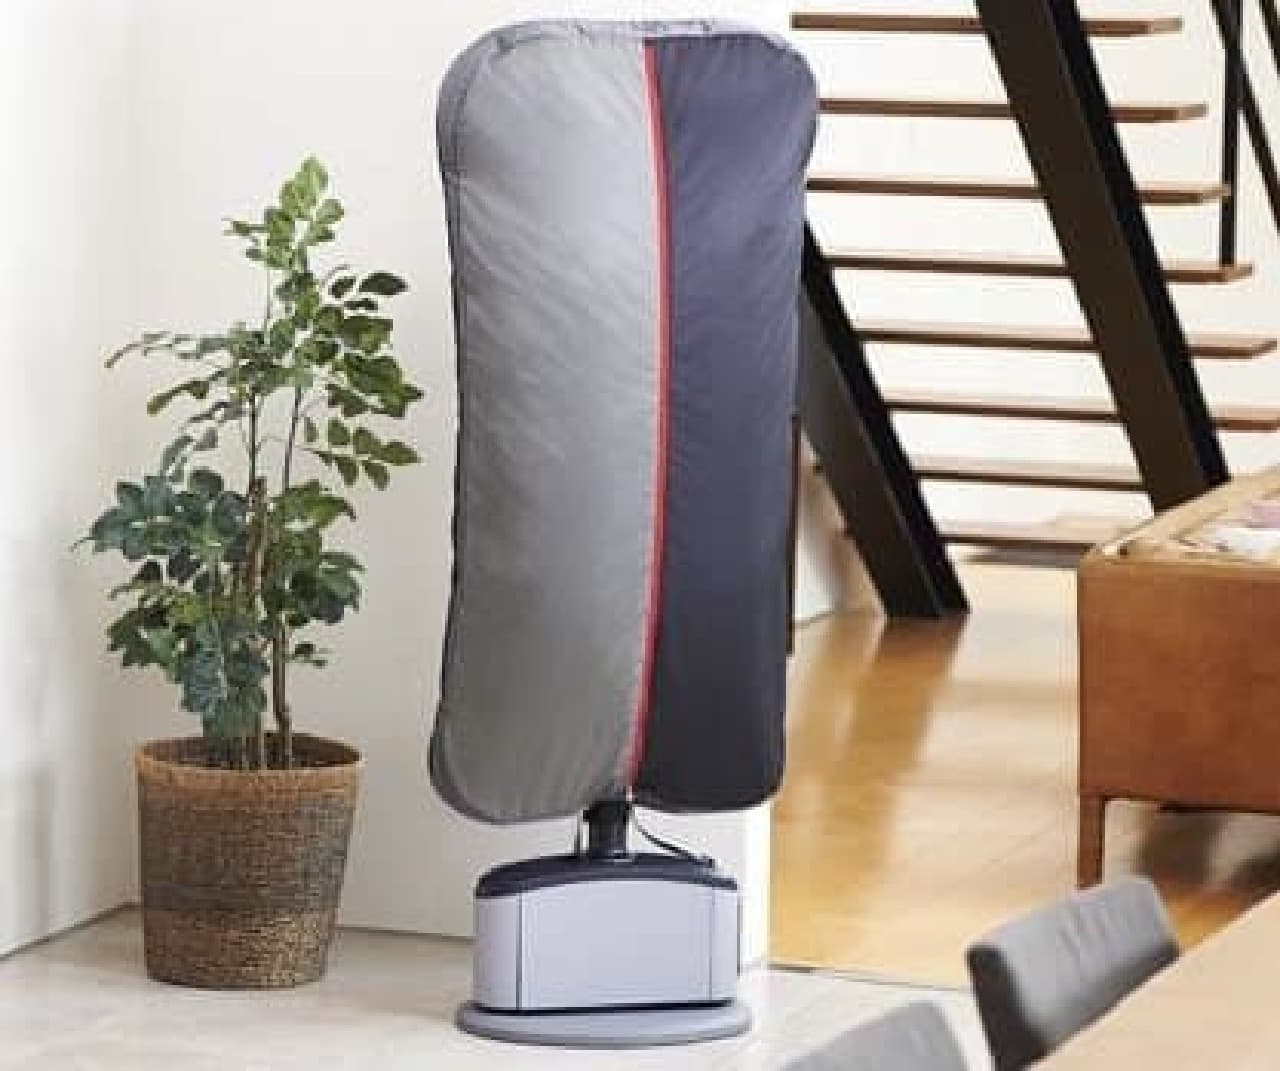 A "waterless" washing machine that can be placed in the living room or office